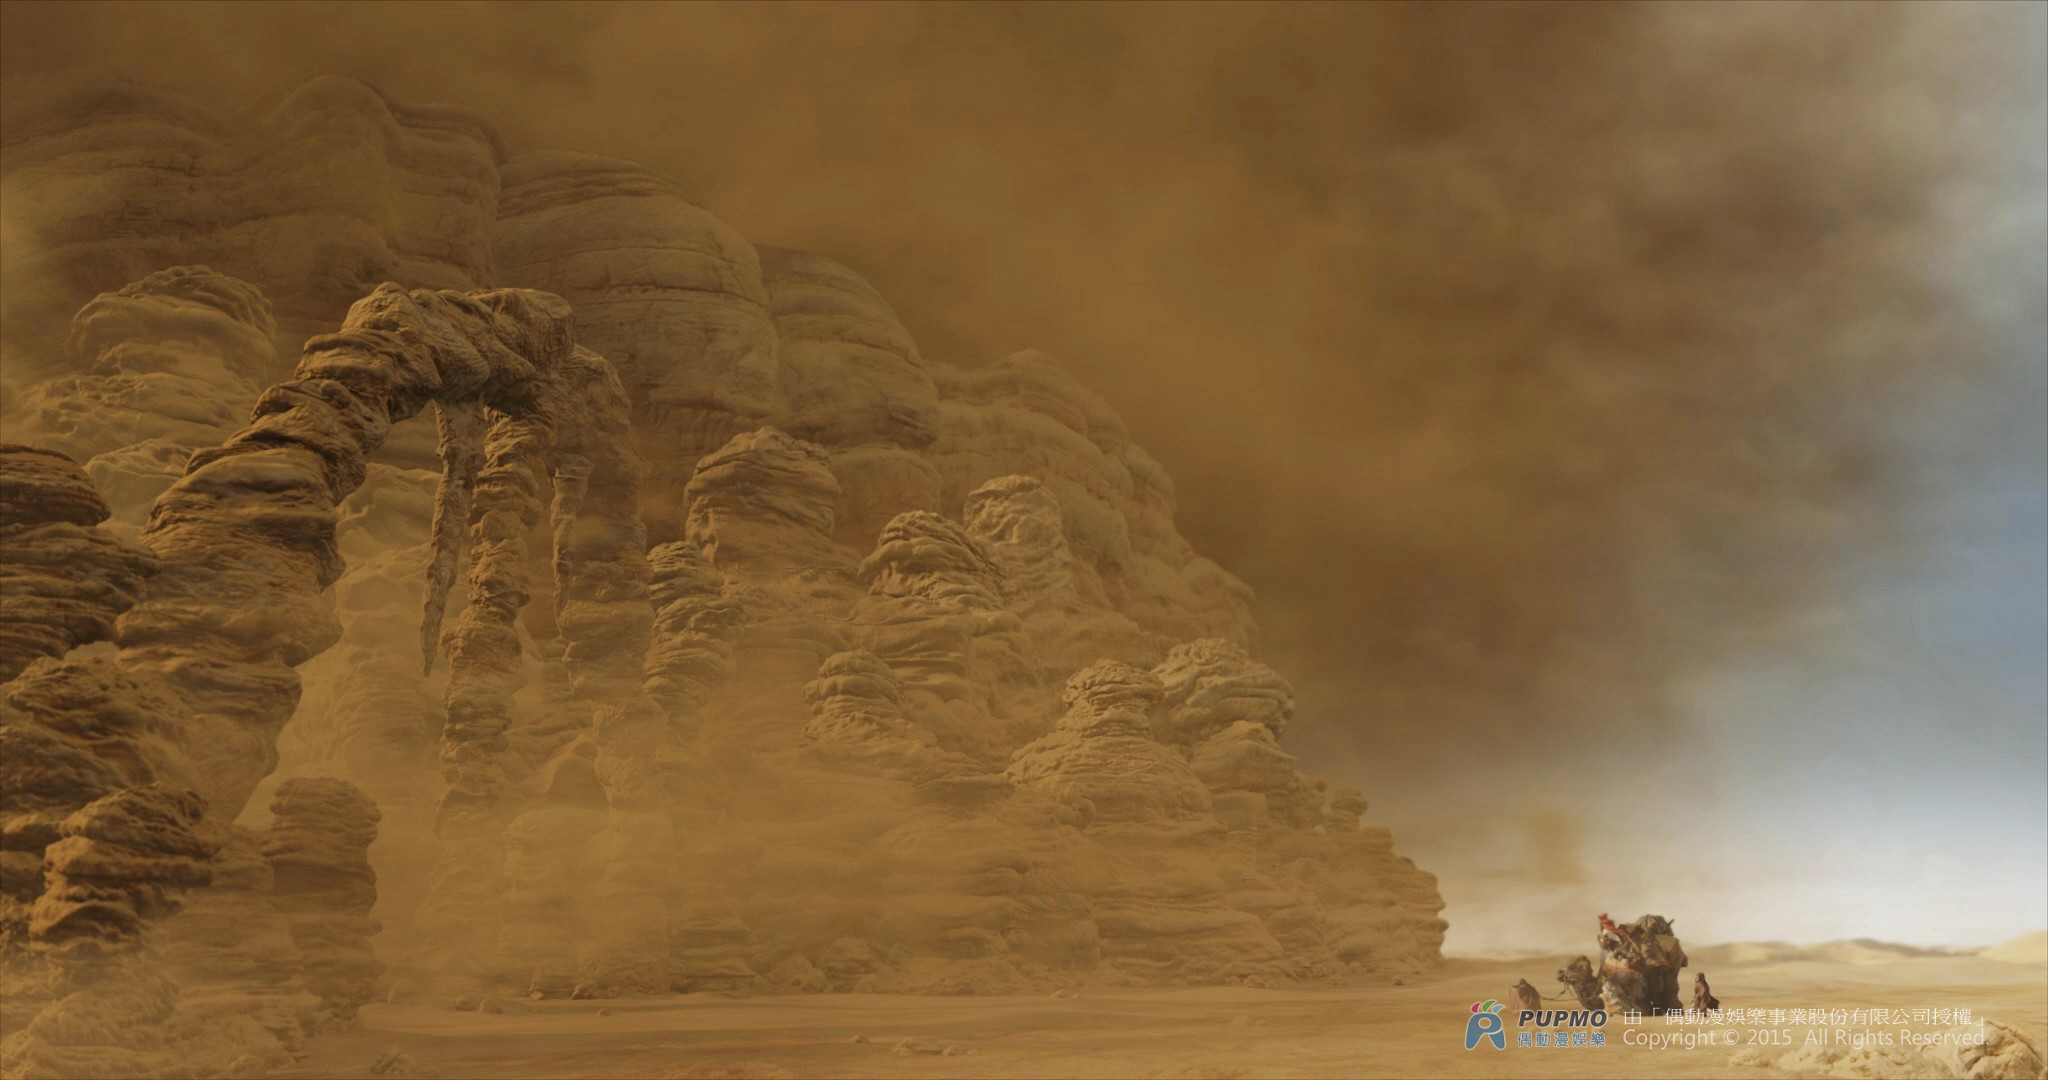 Movie - The Arti : The Adventure Begins - CGI & VFX : scene and sandstorm effect. Click to view large image.